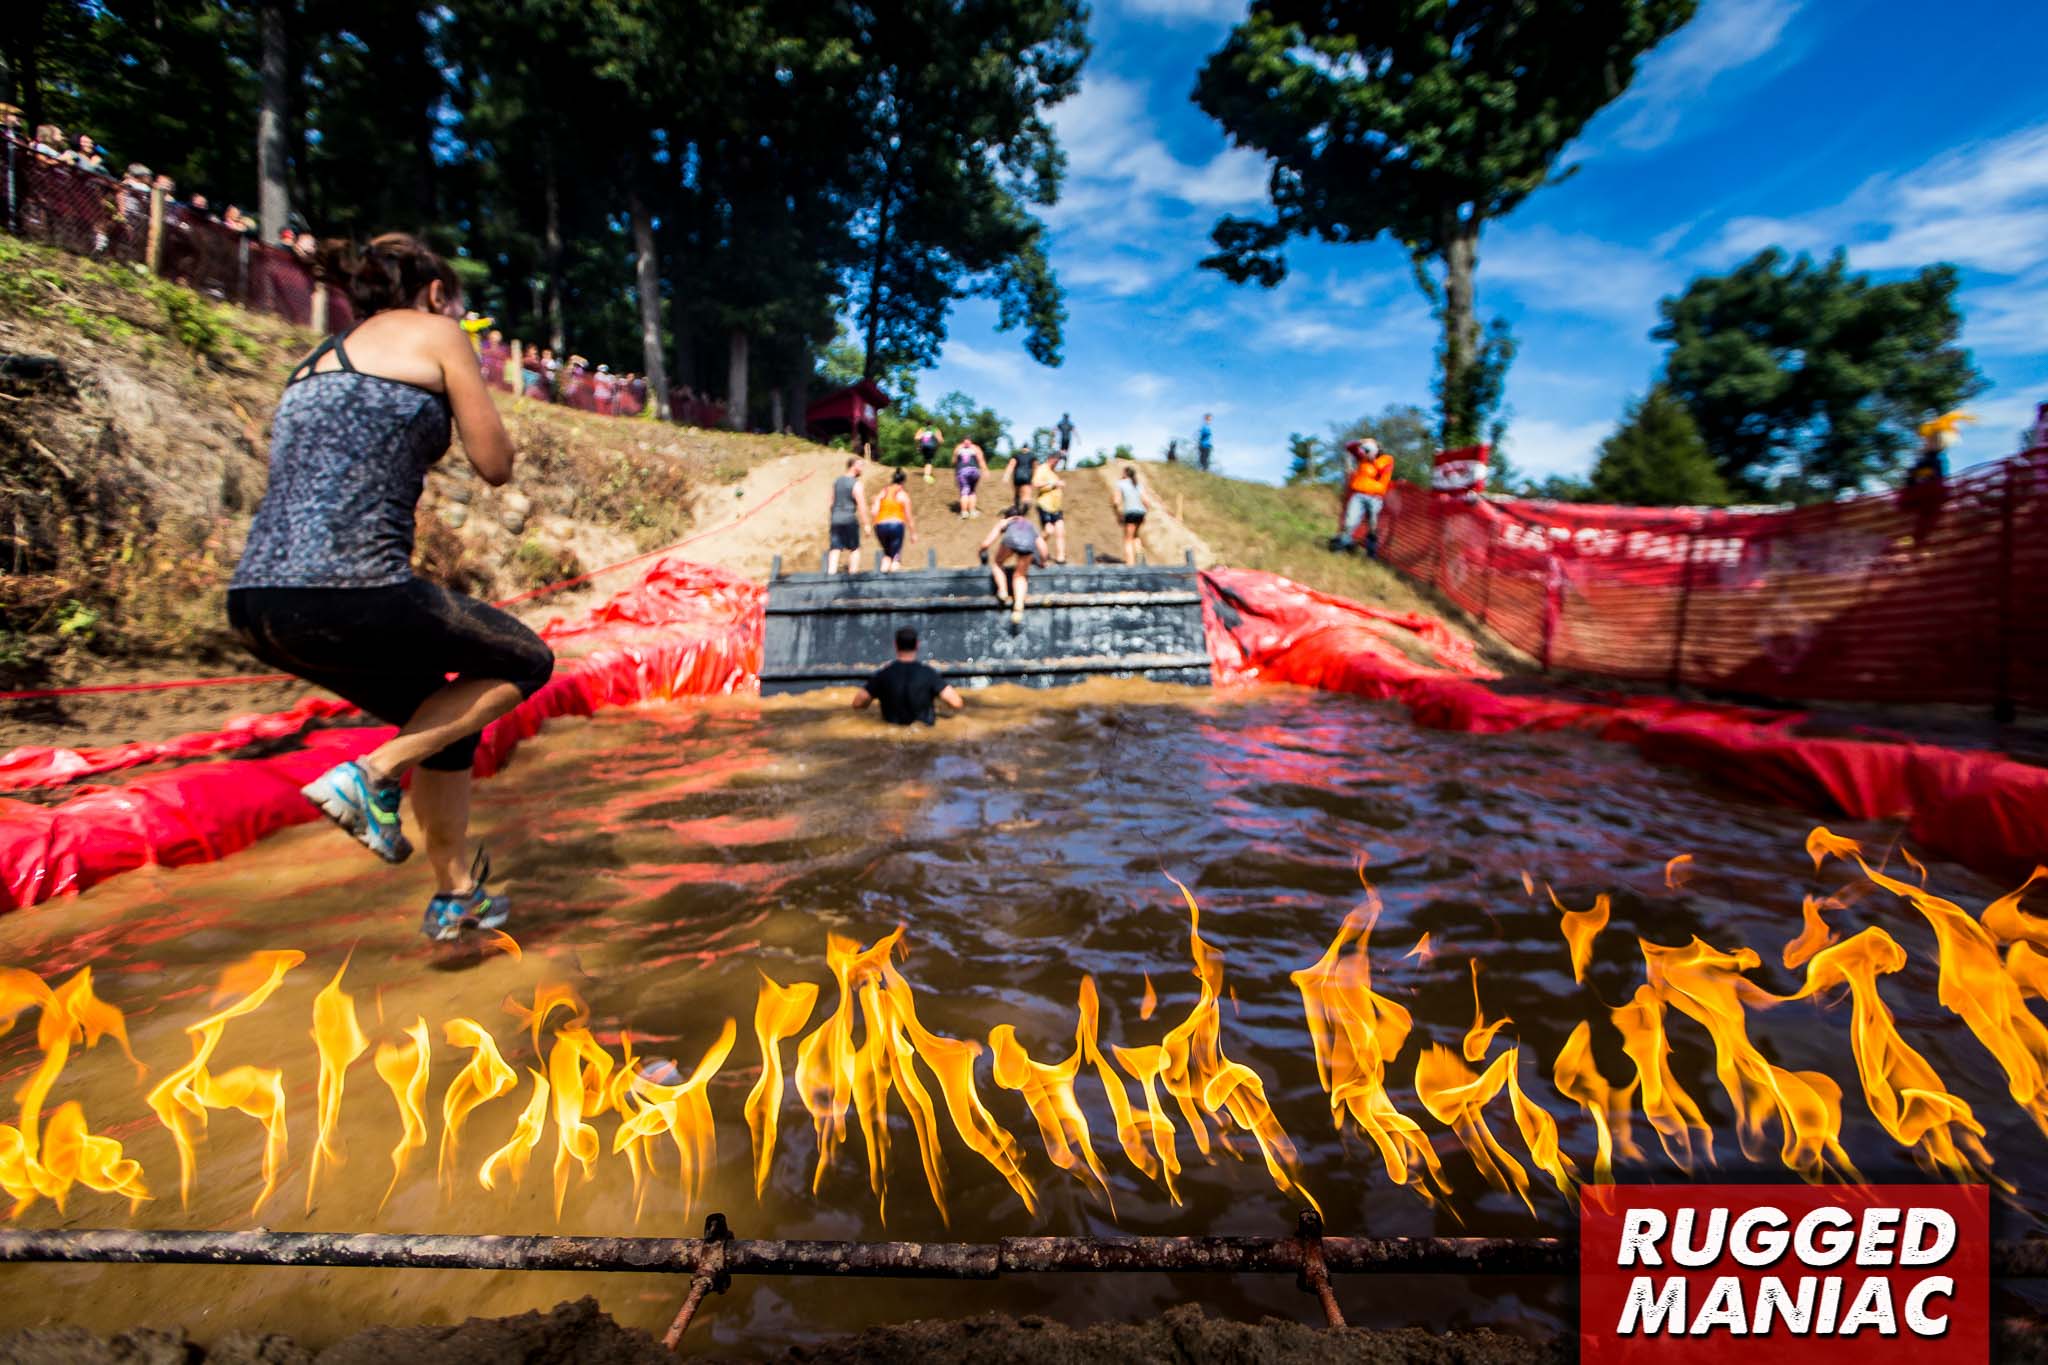 Rugged Maniac The Best Value In Ocr Mud Run Obstacle Course Race Ninja Warrior Guide